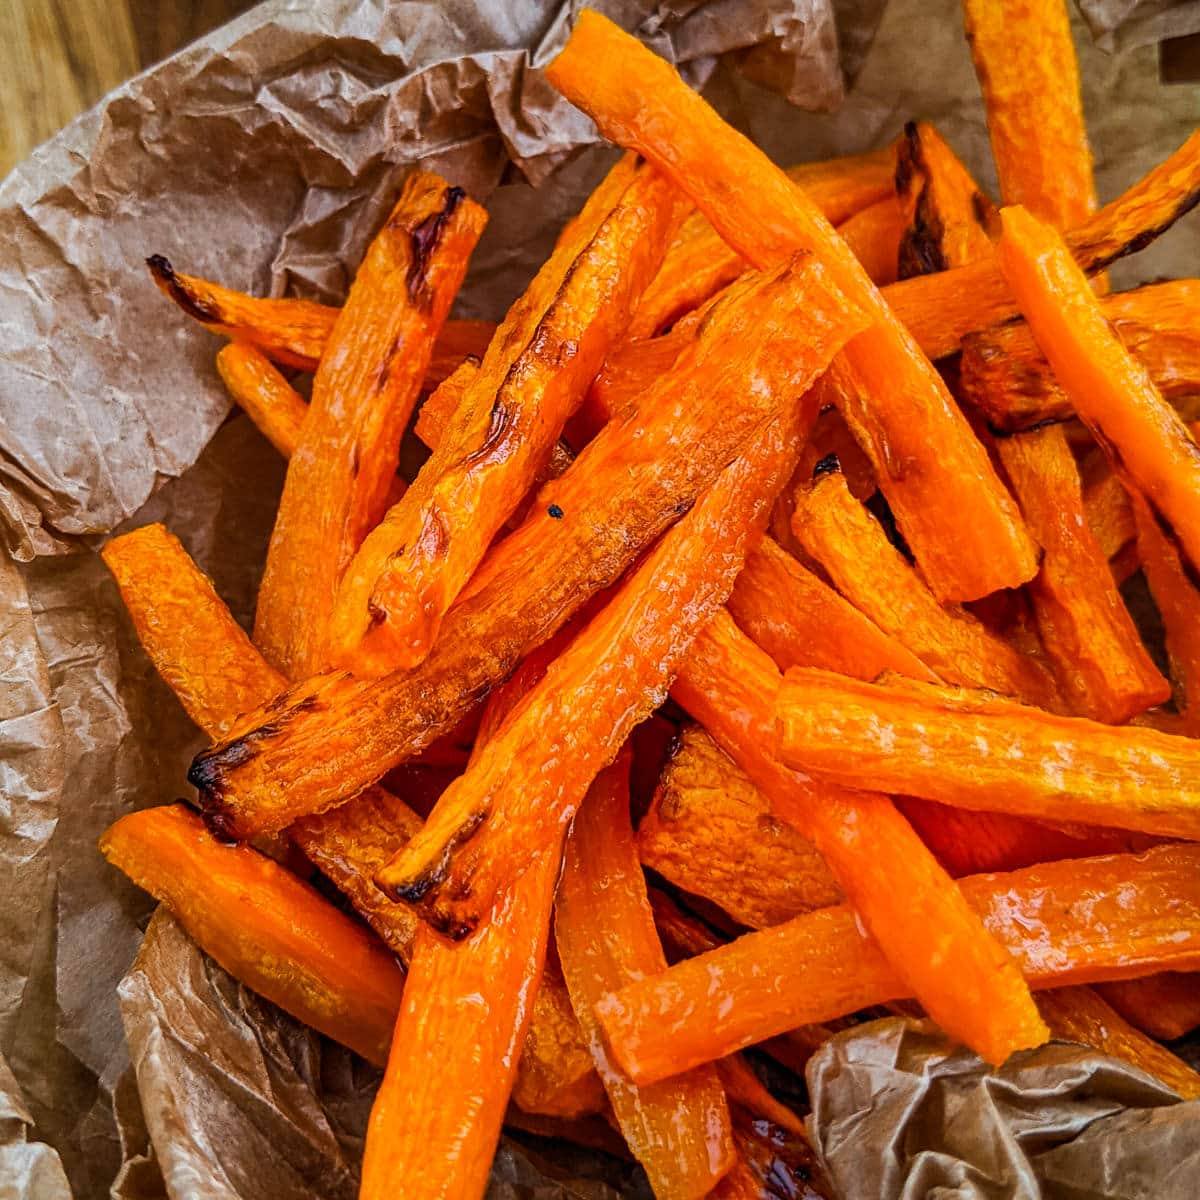 Close view of fried carrot sticks on a perchment paper.